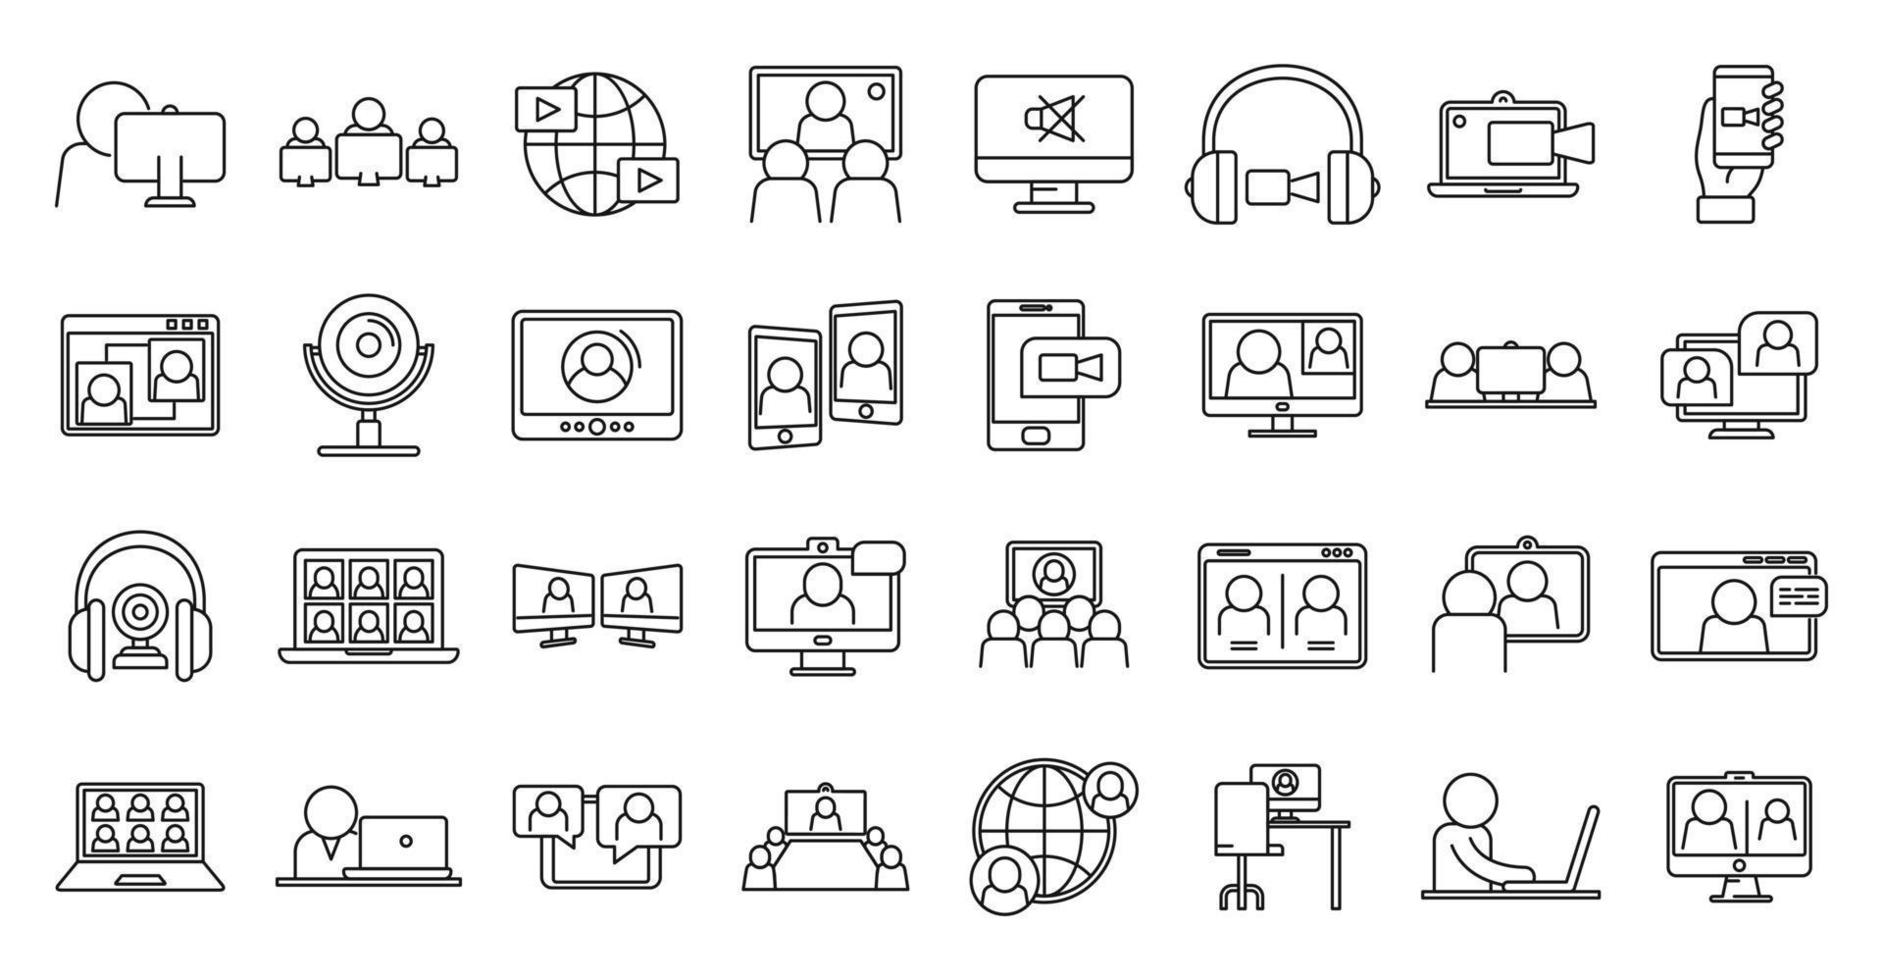 Live online meeting icons set, outline style vector